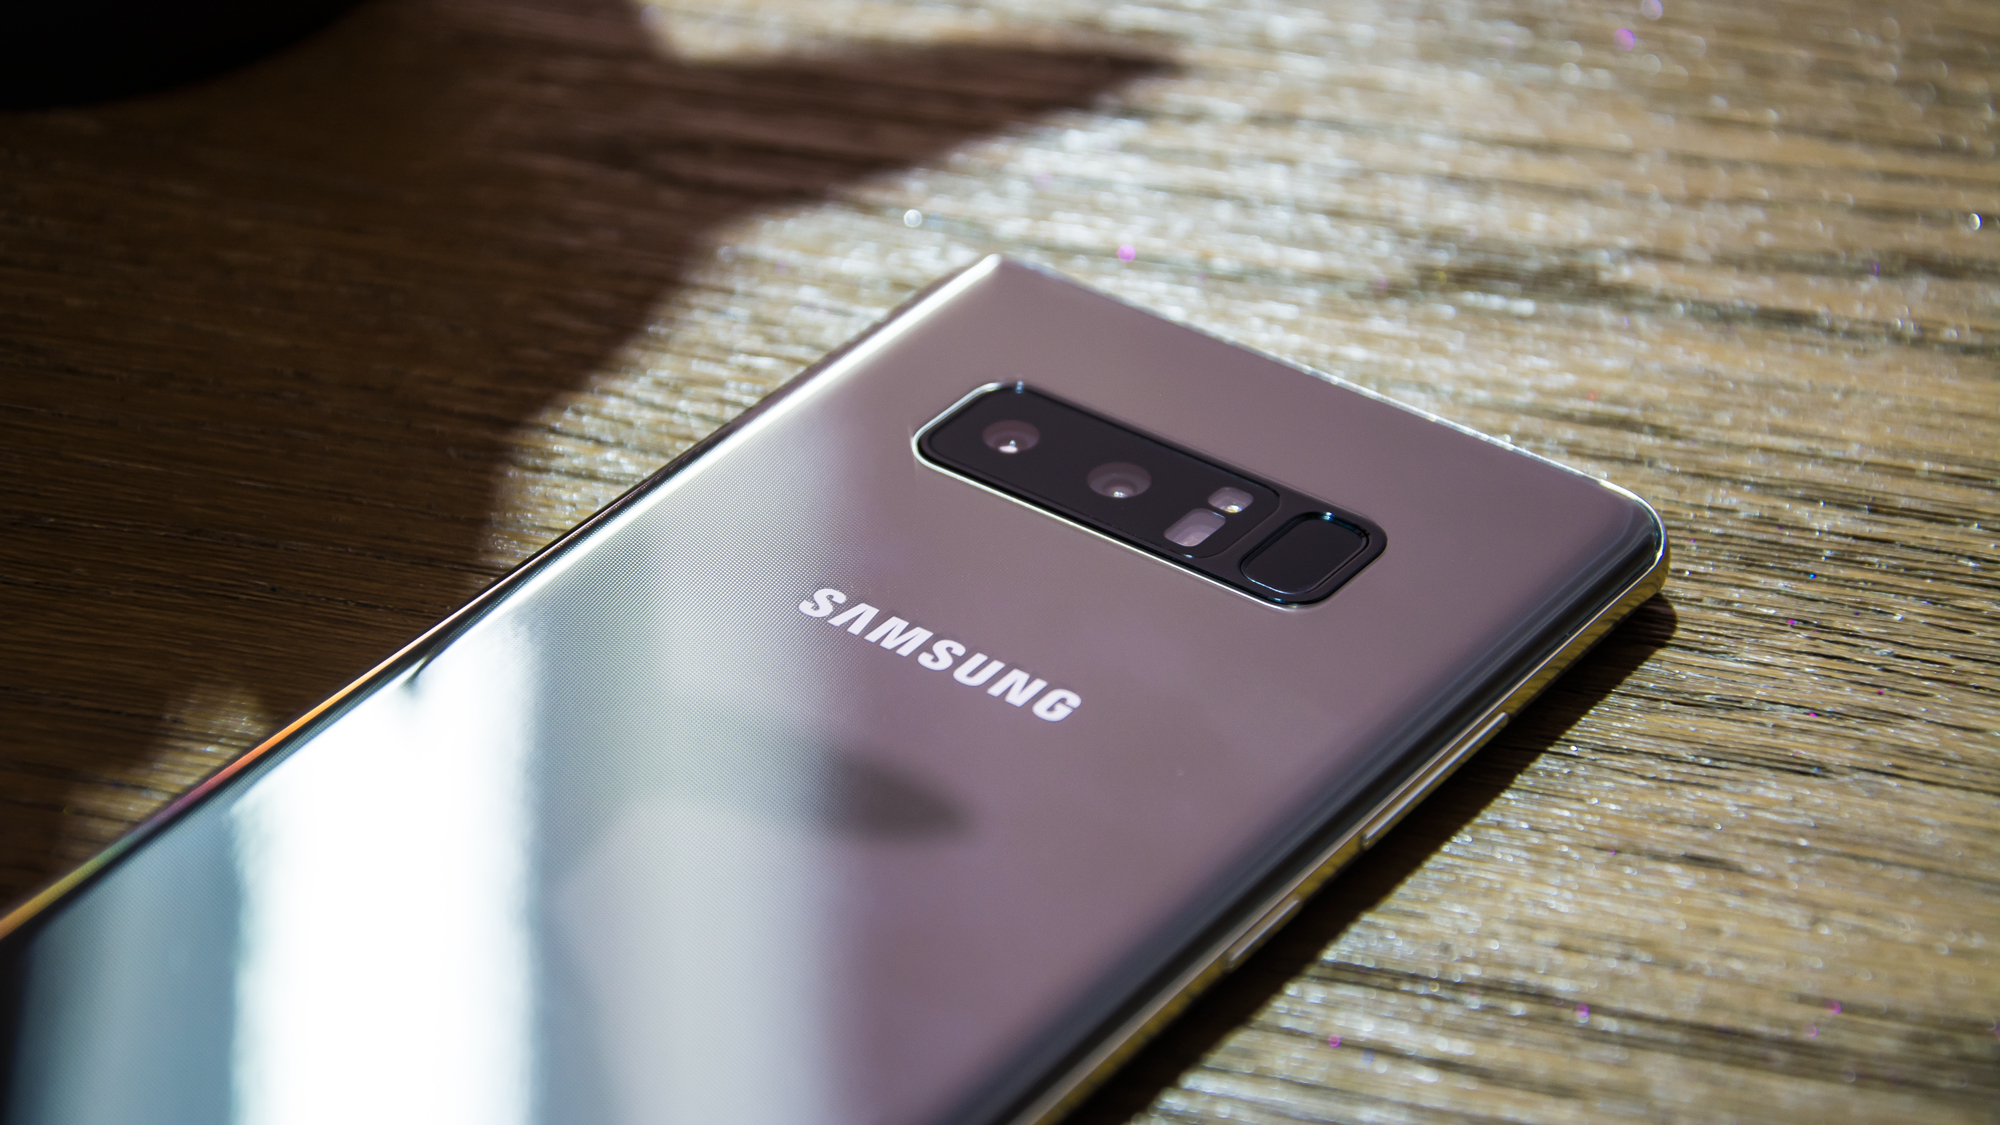 Losjes Zeestraat Wordt erger Samsung Galaxy Note 8 review: Plus-sized excellence